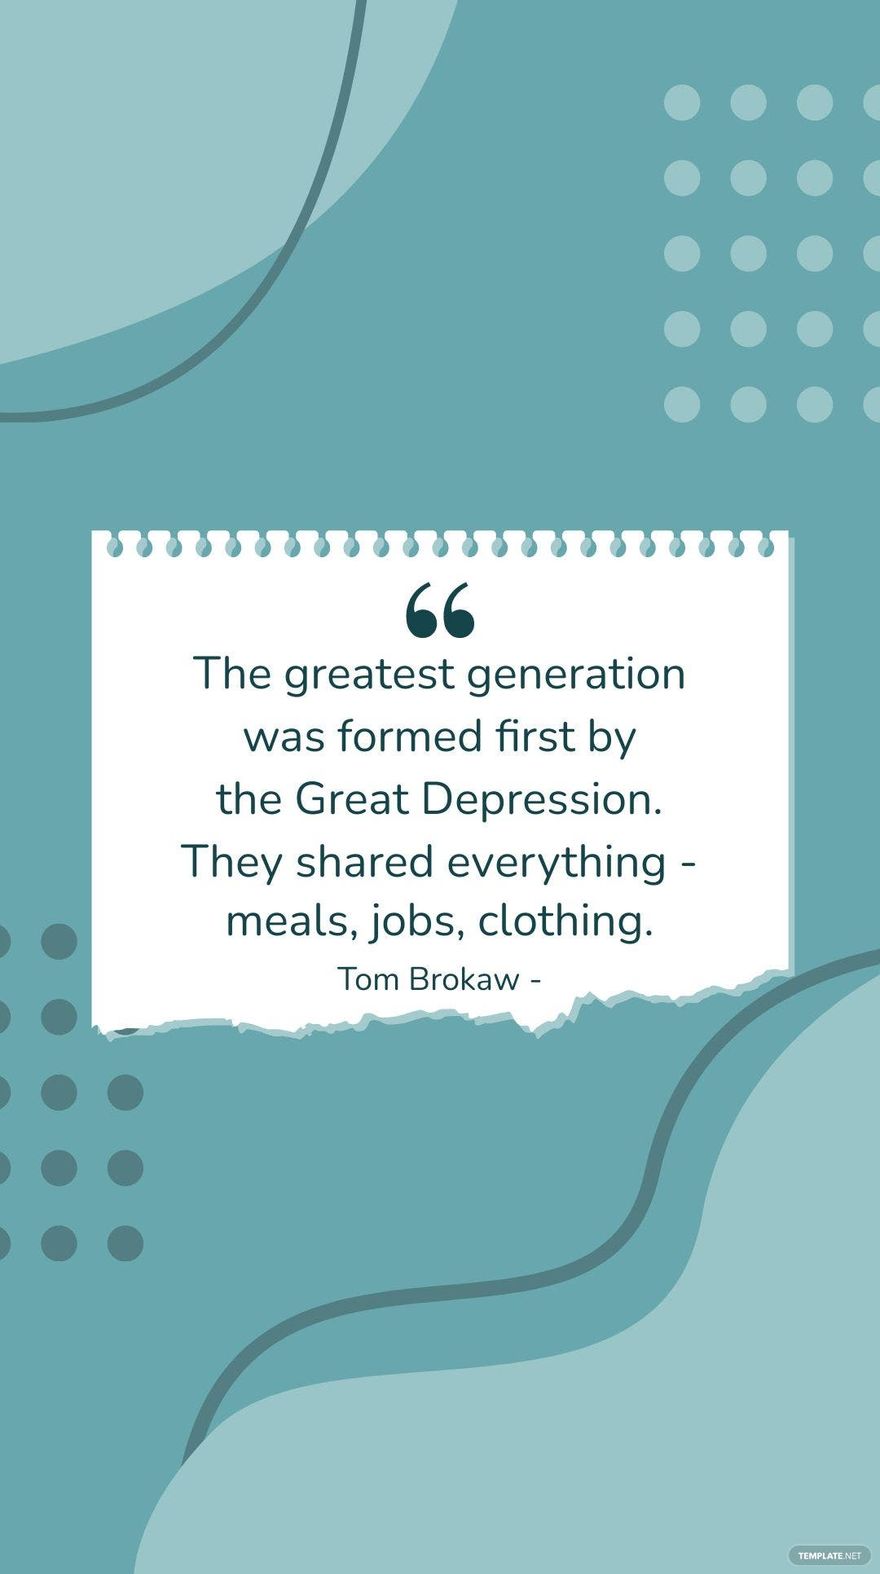 Tom Brokaw - The greatest generation was formed first by the Great Depression. They shared everything - meals, jobs, clothing.